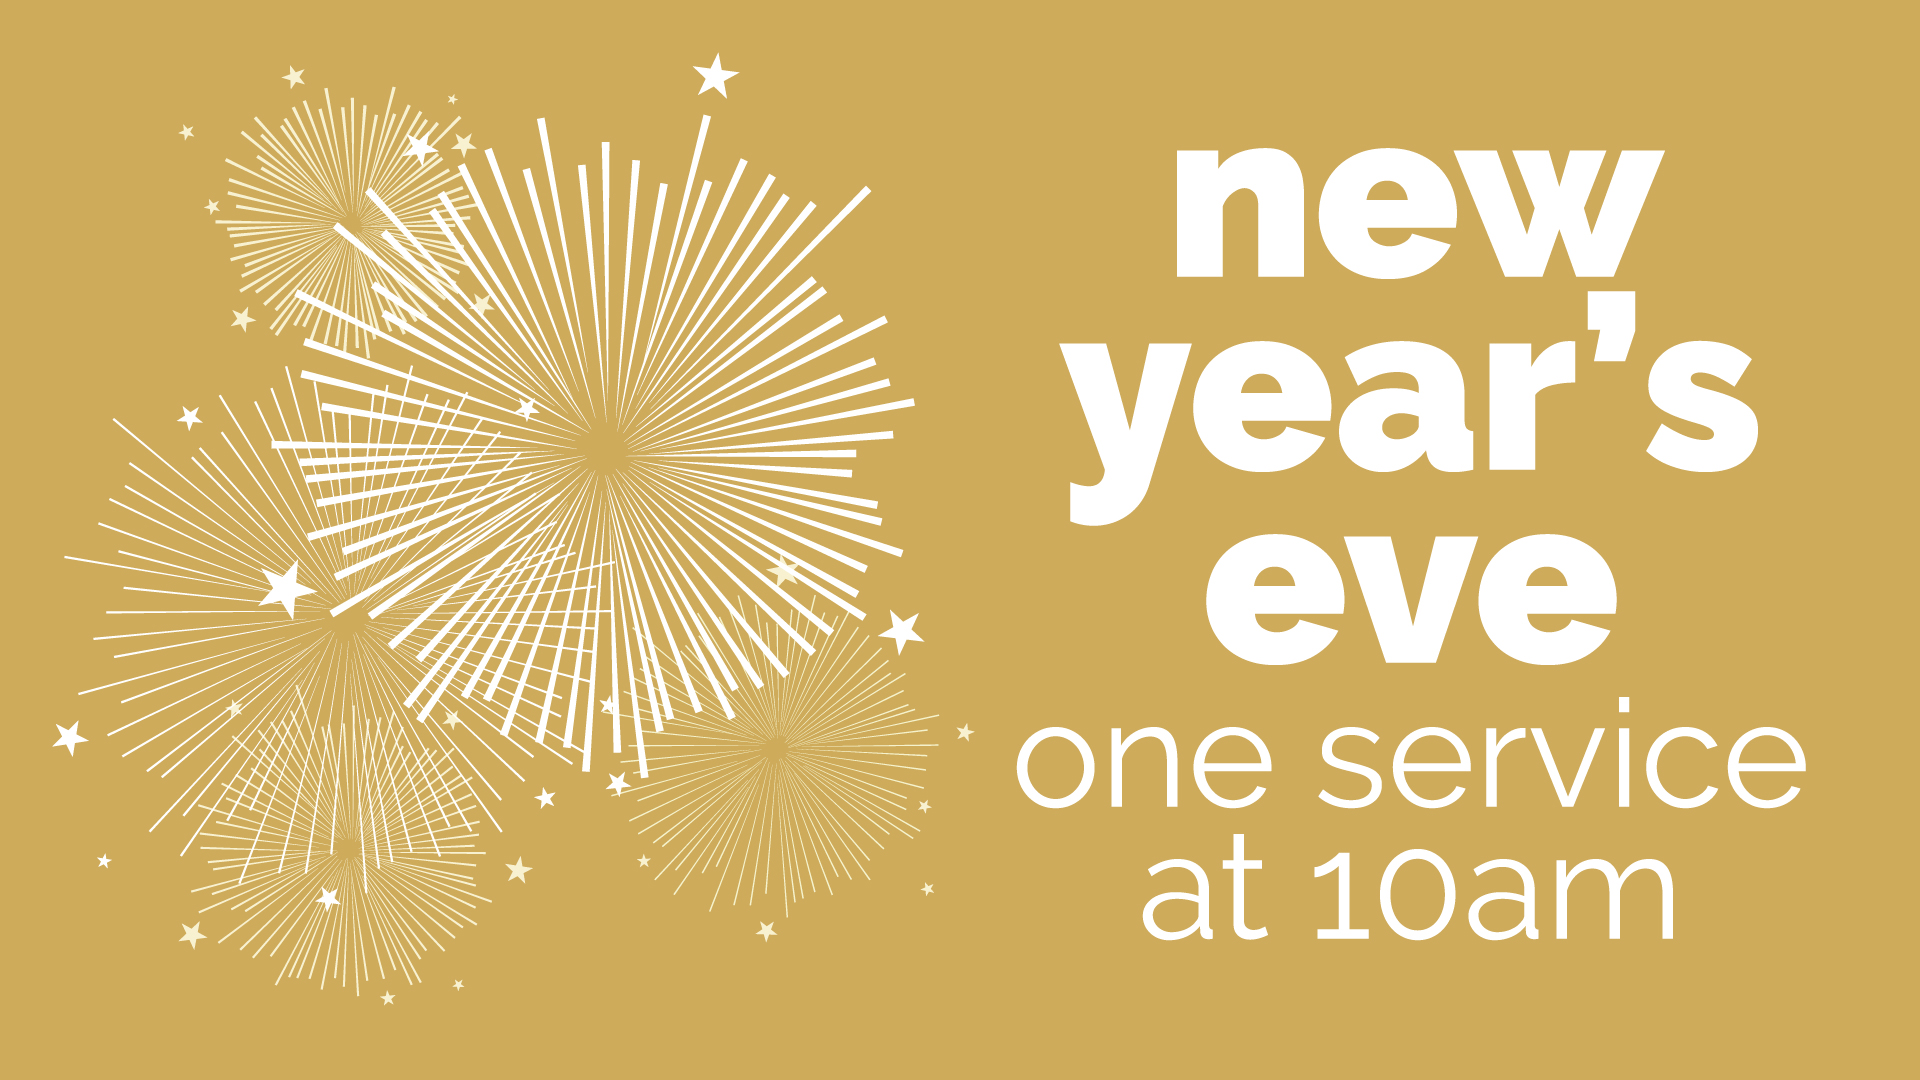 New Year's Eve | One service at 10am